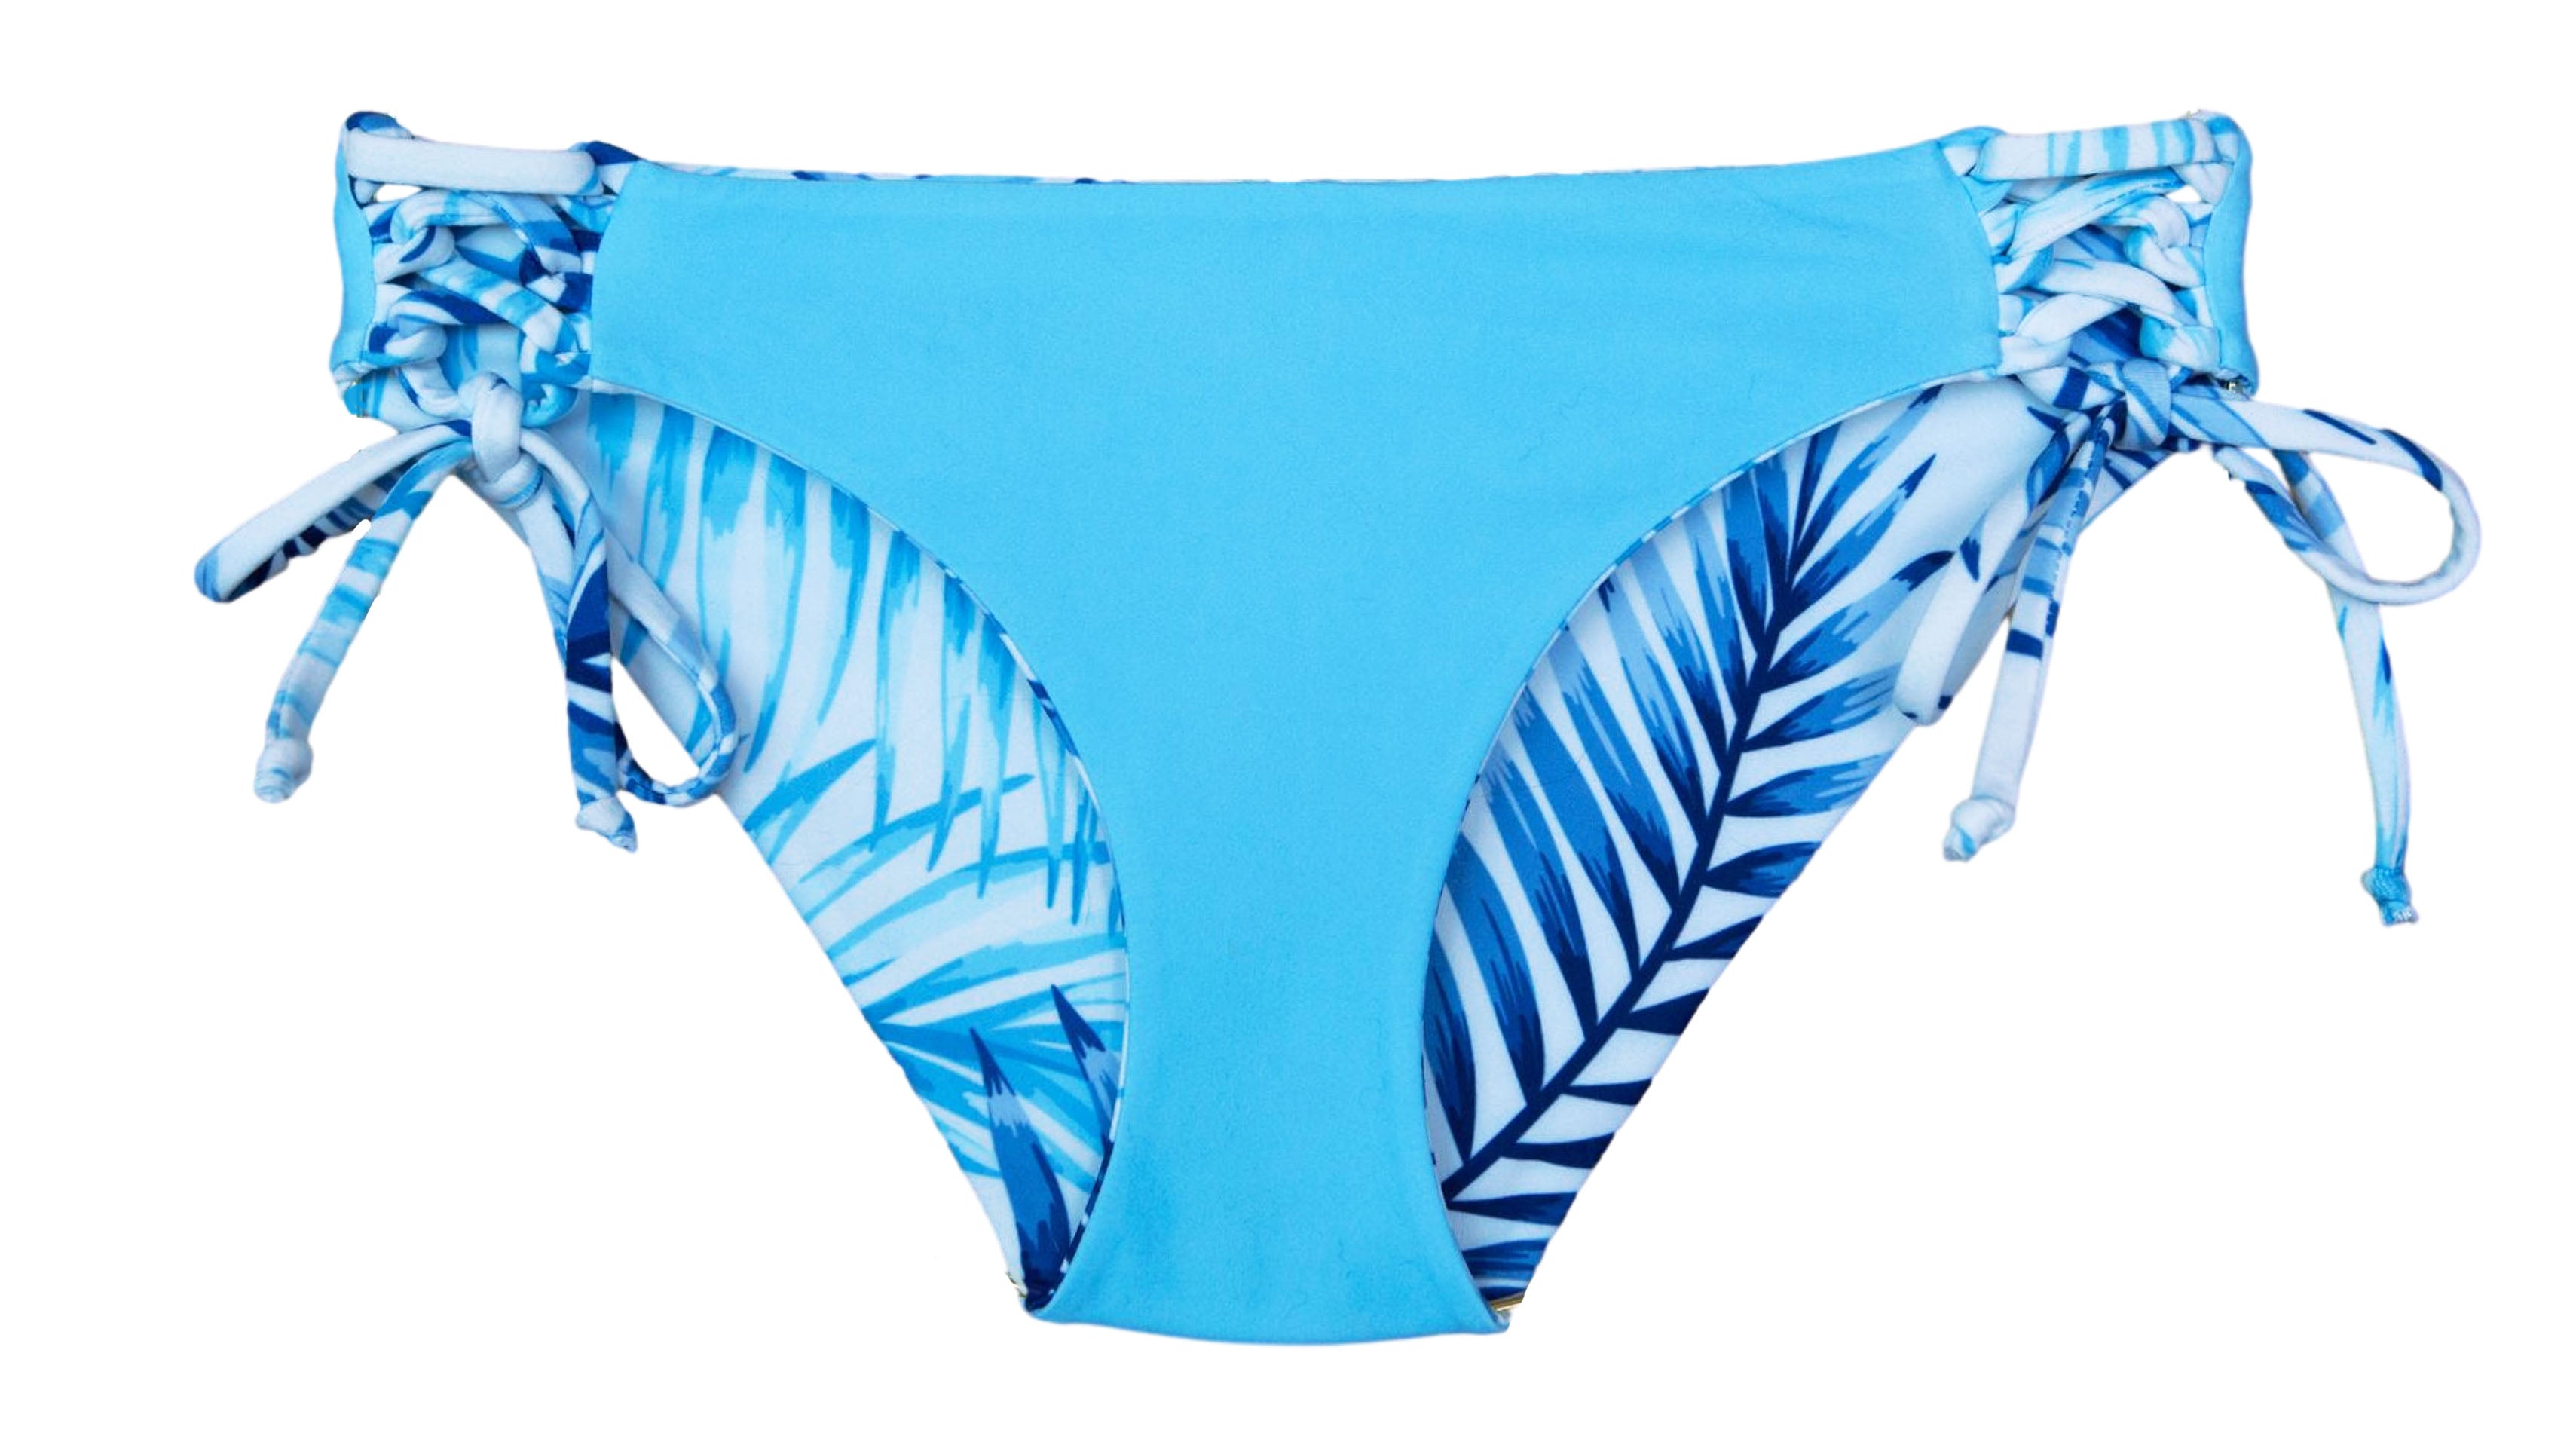 Bikini bottoms Reversible with a blue and white tropical print full coverage for Teenagers